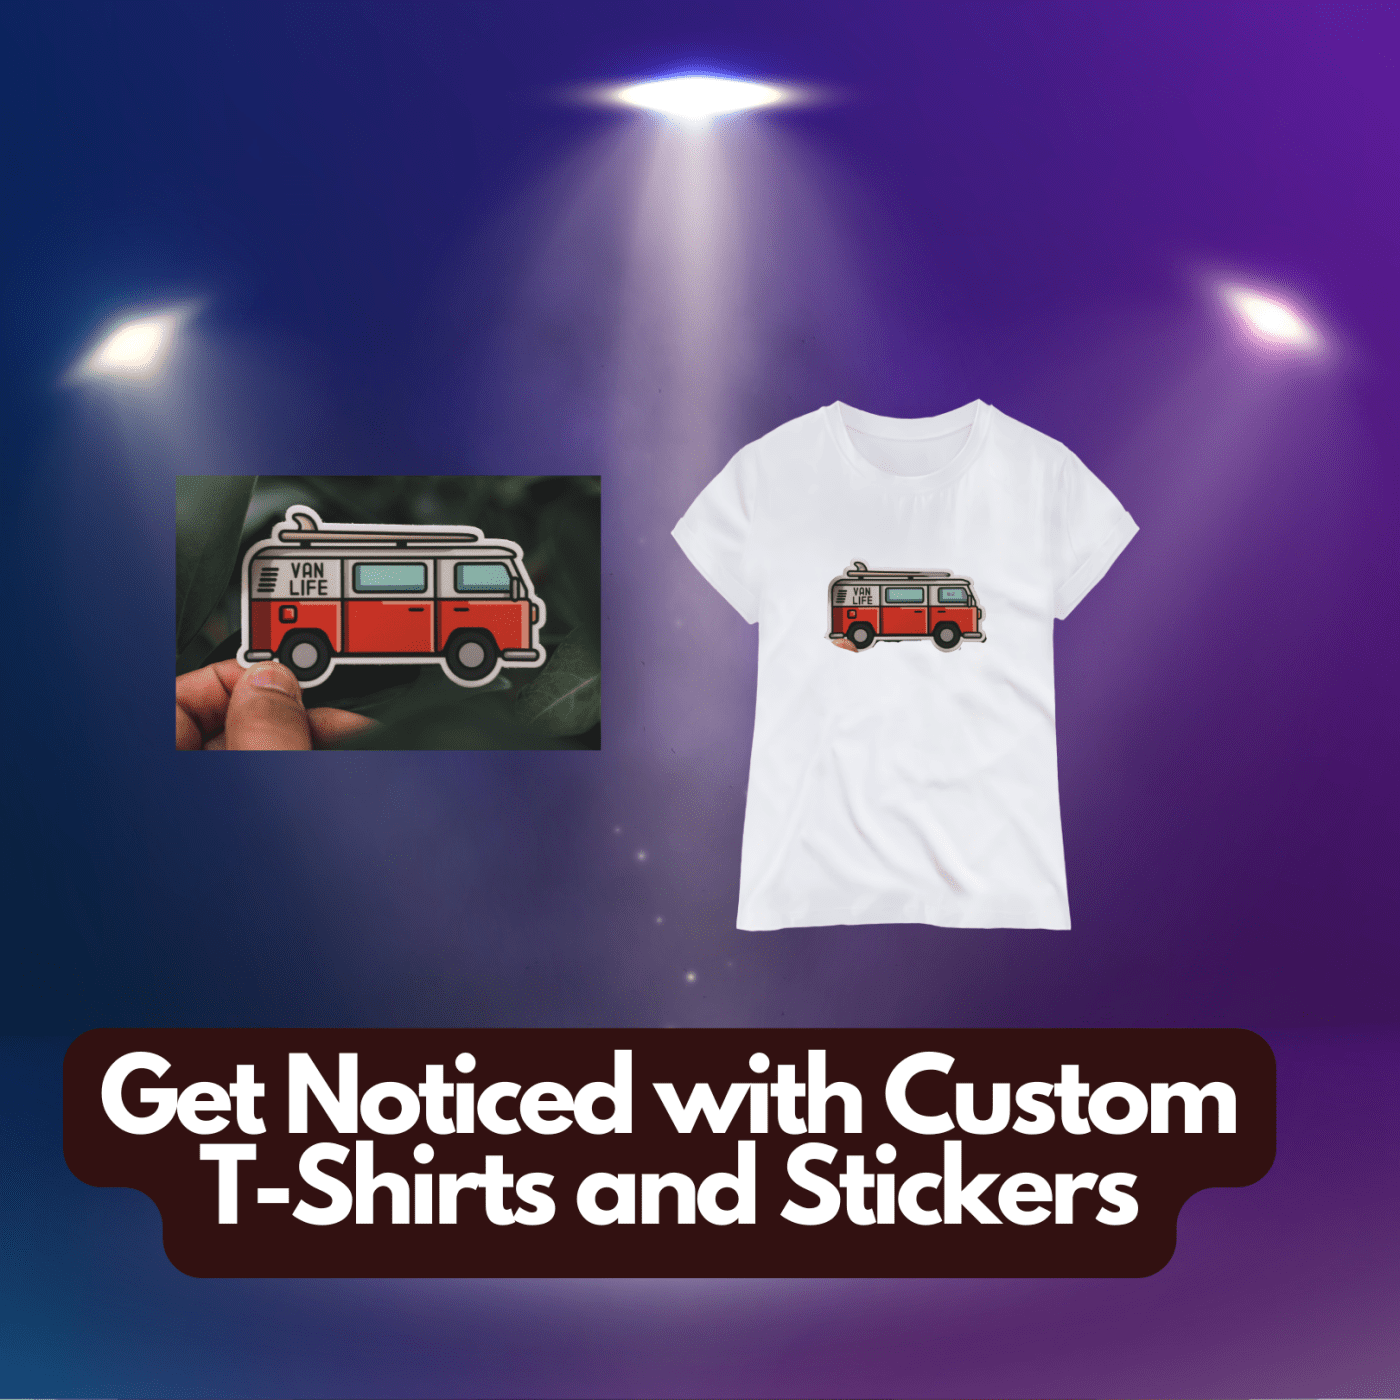 t shirt printing, t-shirt printing, custom t shirts, custom t-shirts, Get Noticed with Custom T-Shirts and Stickers